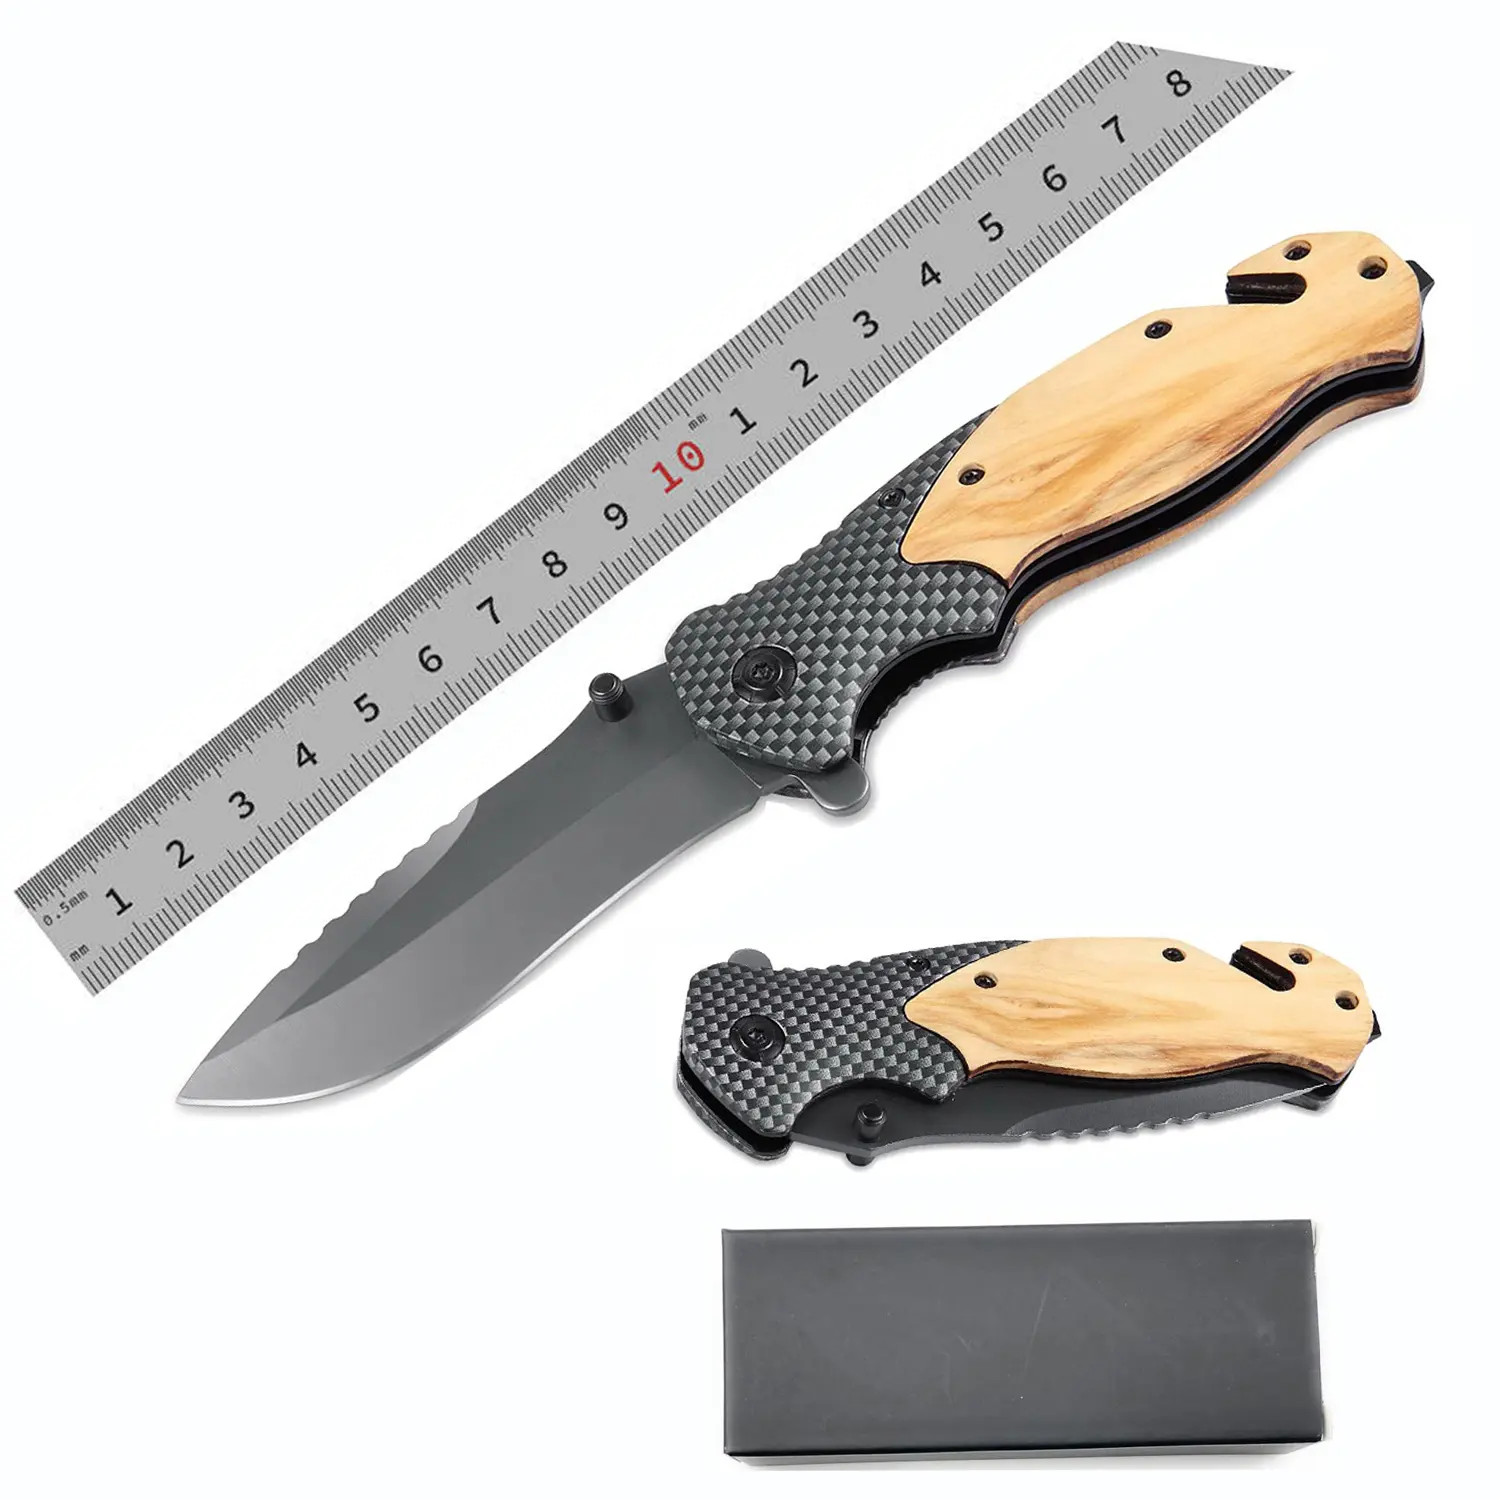 Hot Selling Outdoor Tools Wood Pocket Wooden Knife Camping Hunting Pocket Outdoor Folding Knife